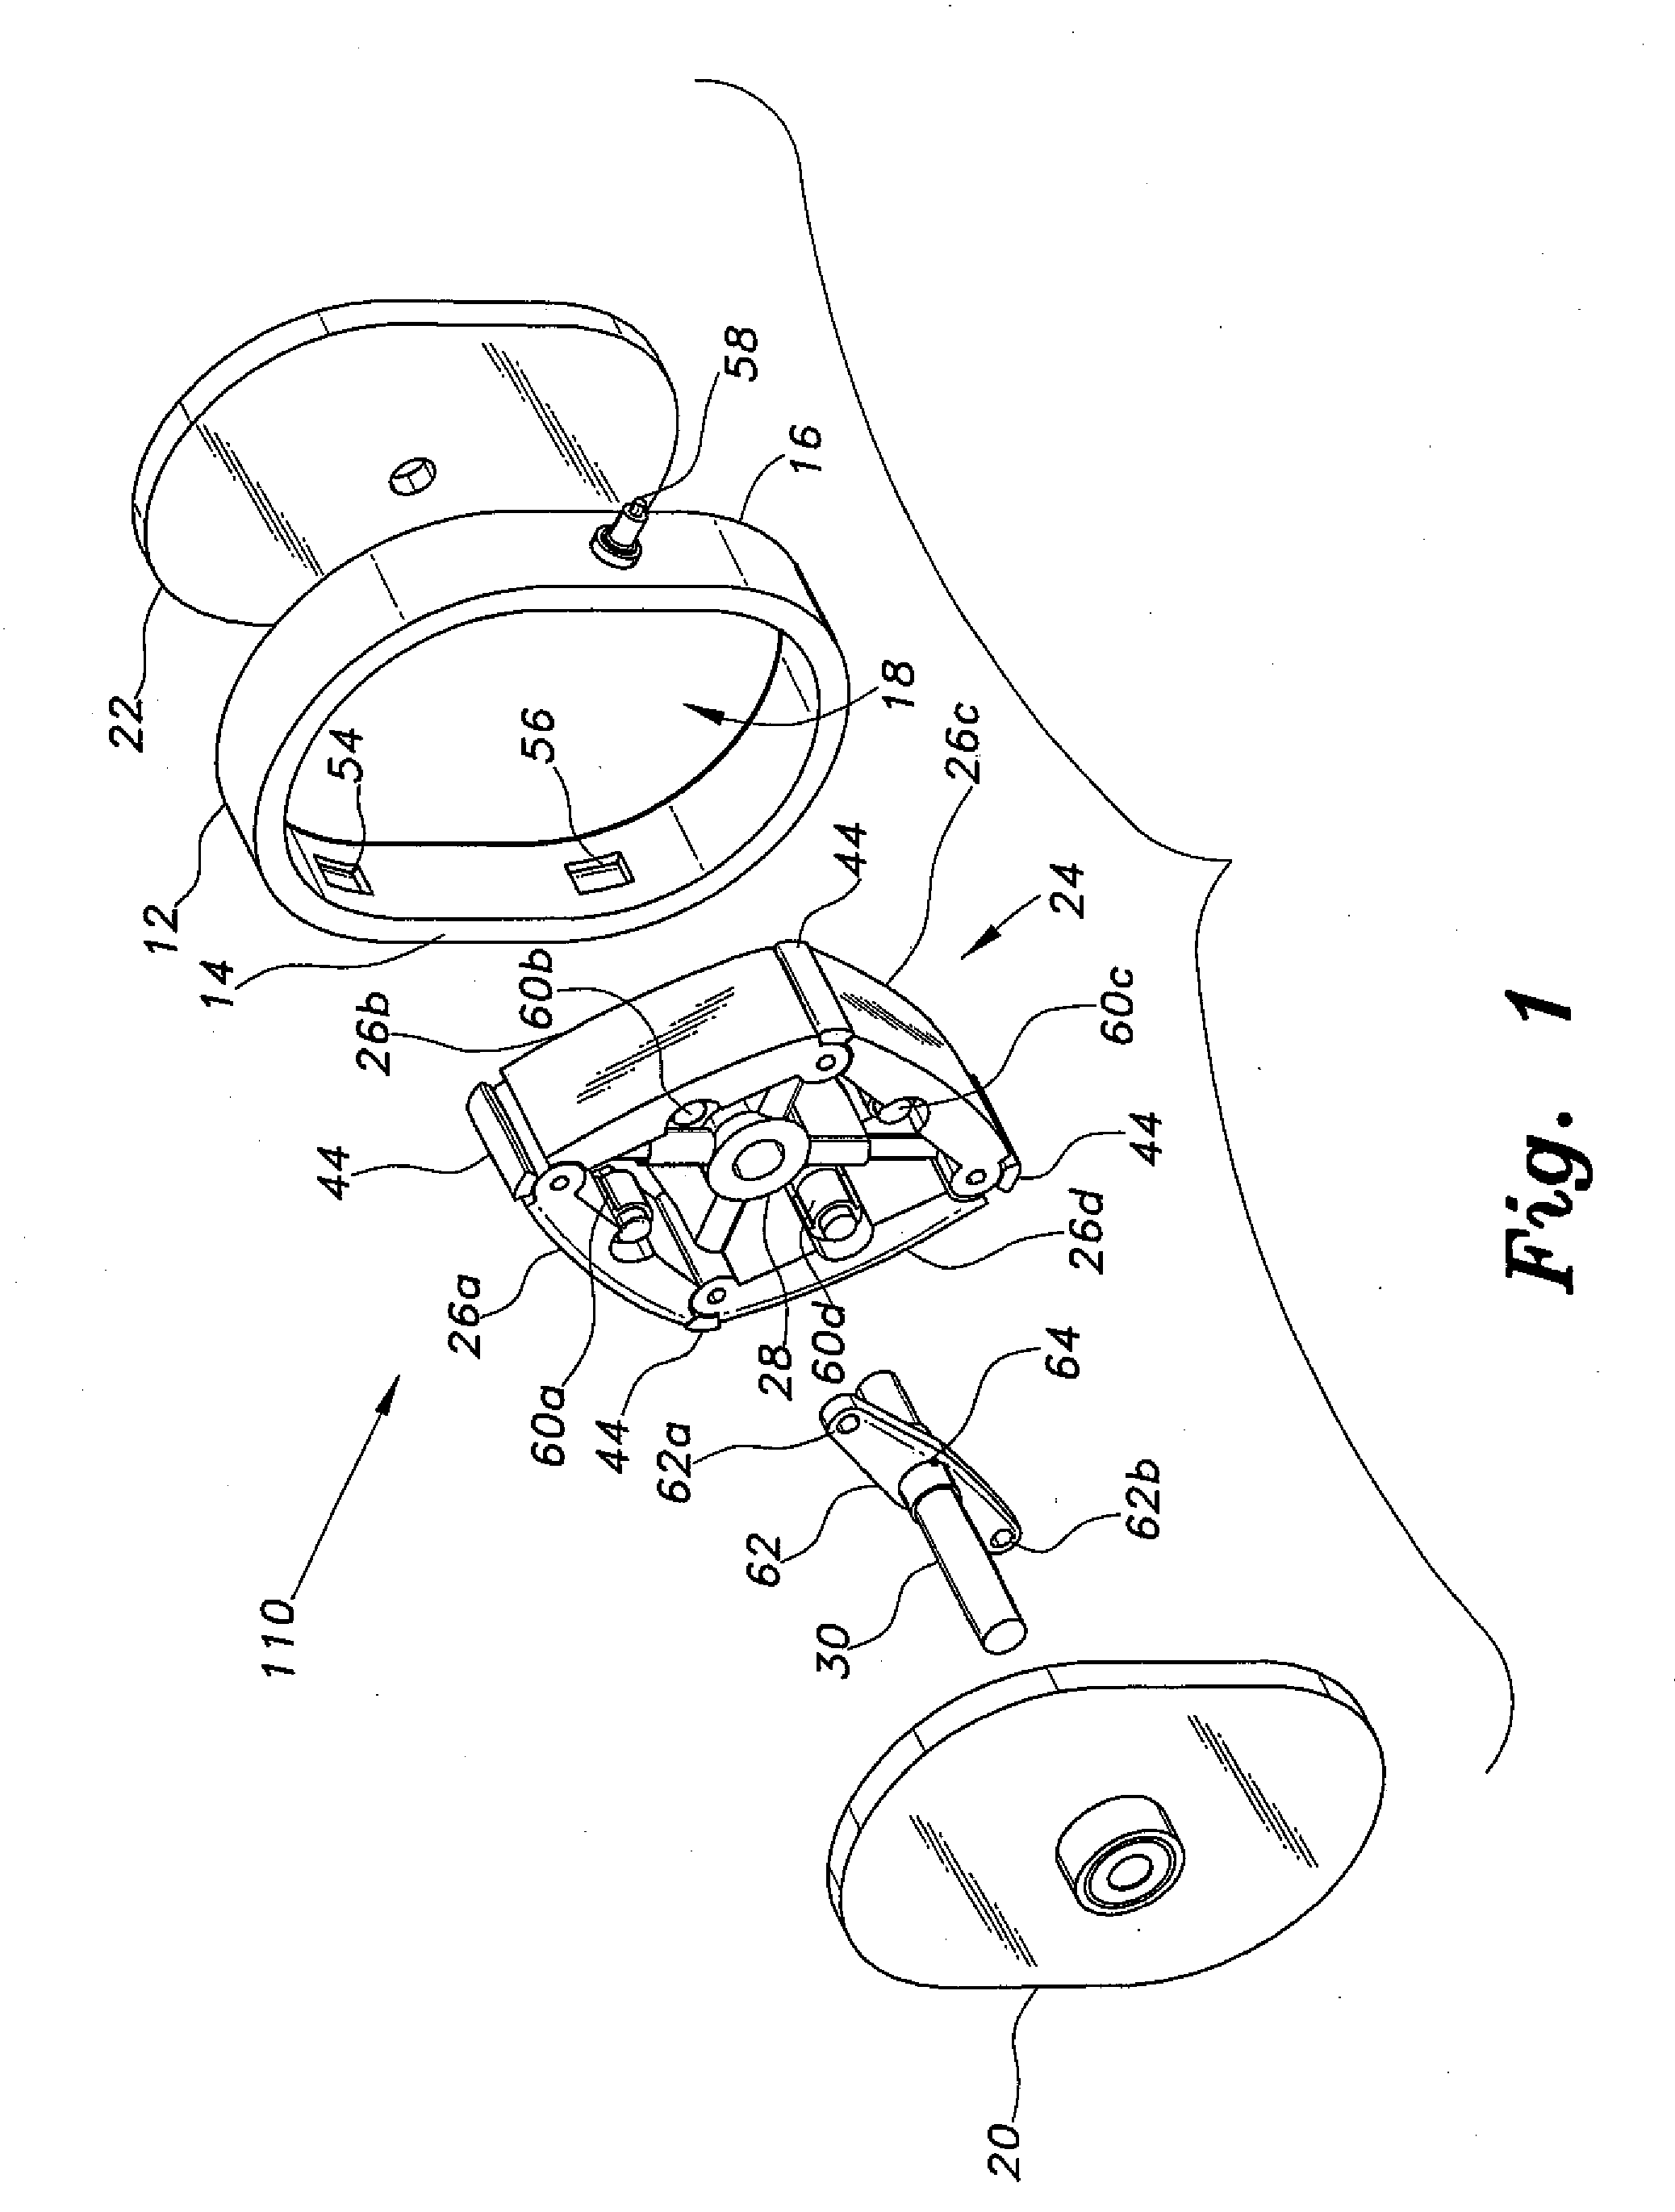 Rotary mechanism with articulating rotor